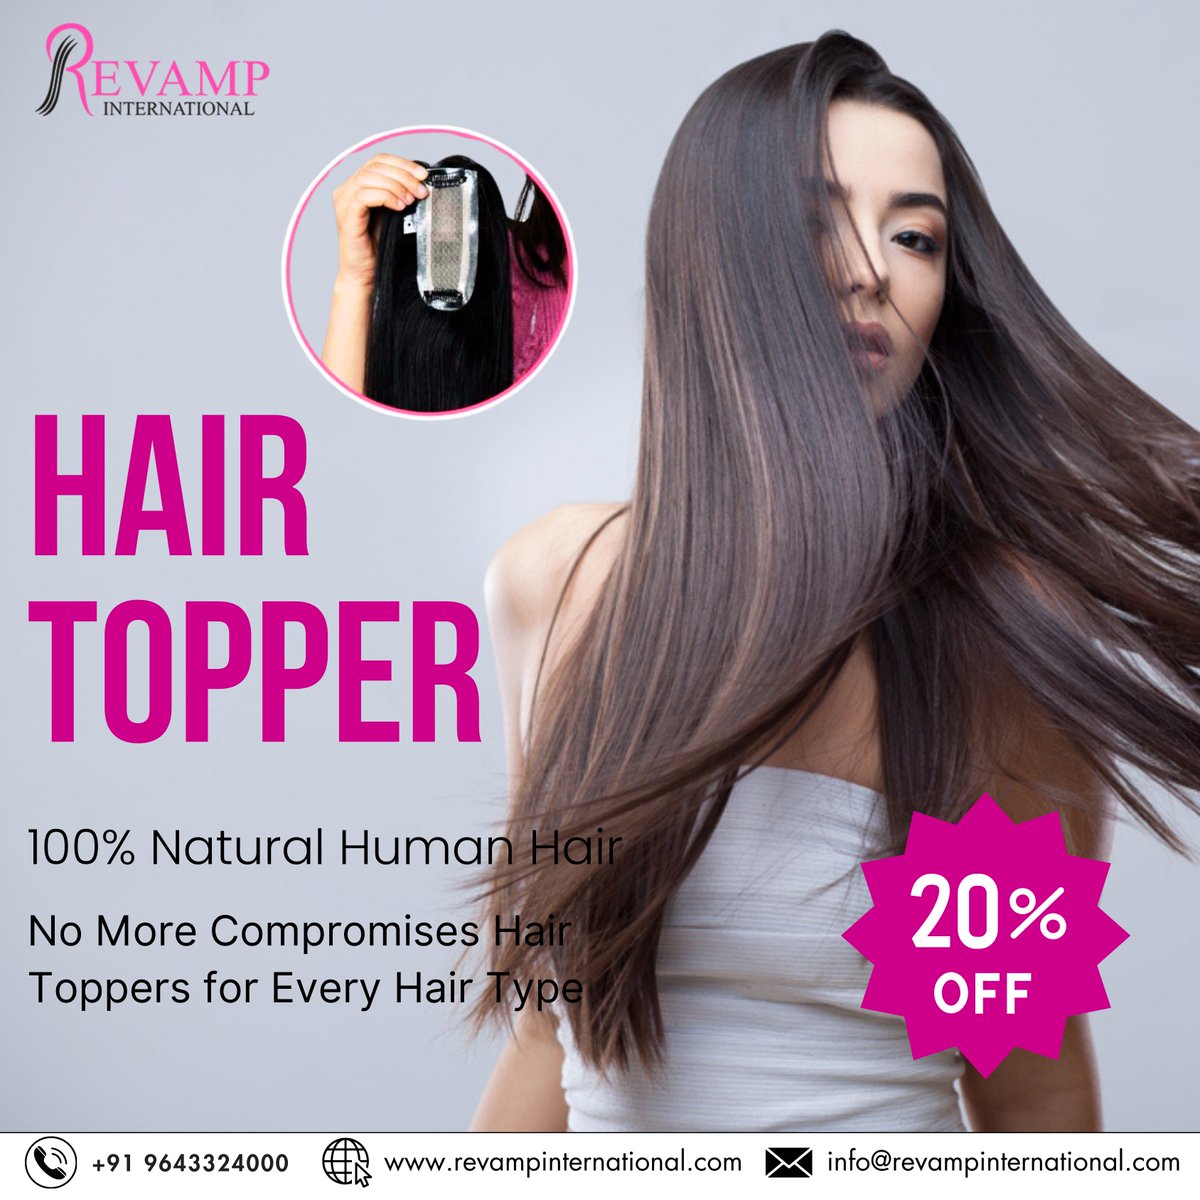 Introducing our latest hair topper for Revampinternational.

Transform your look effortlessly with this versatile accessory!

Say goodbye to bad hair days and hello to instant glam

#RevampInternational #hairtoppers #hairthinning #customhairtoppers #NaturalHairToppers